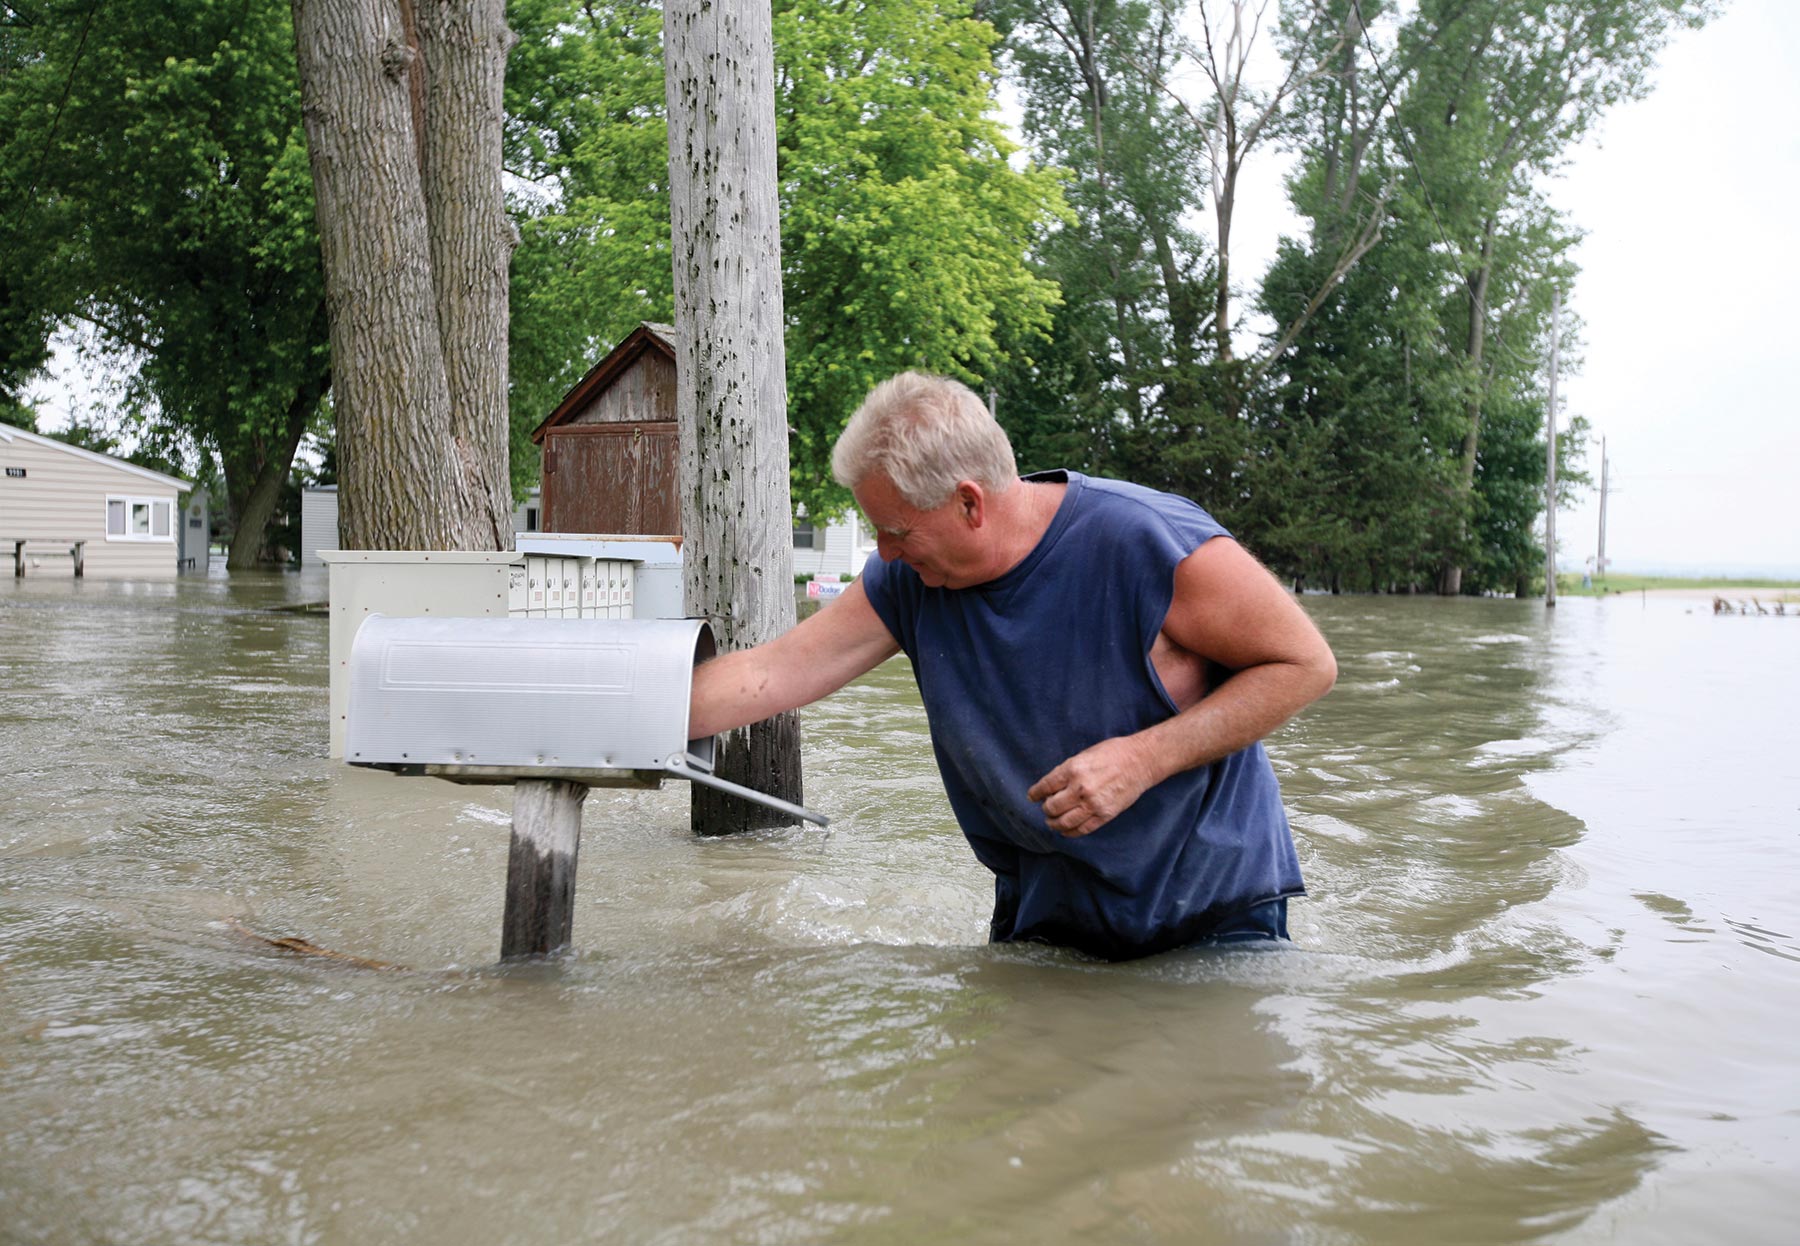 man and mailbox in flood